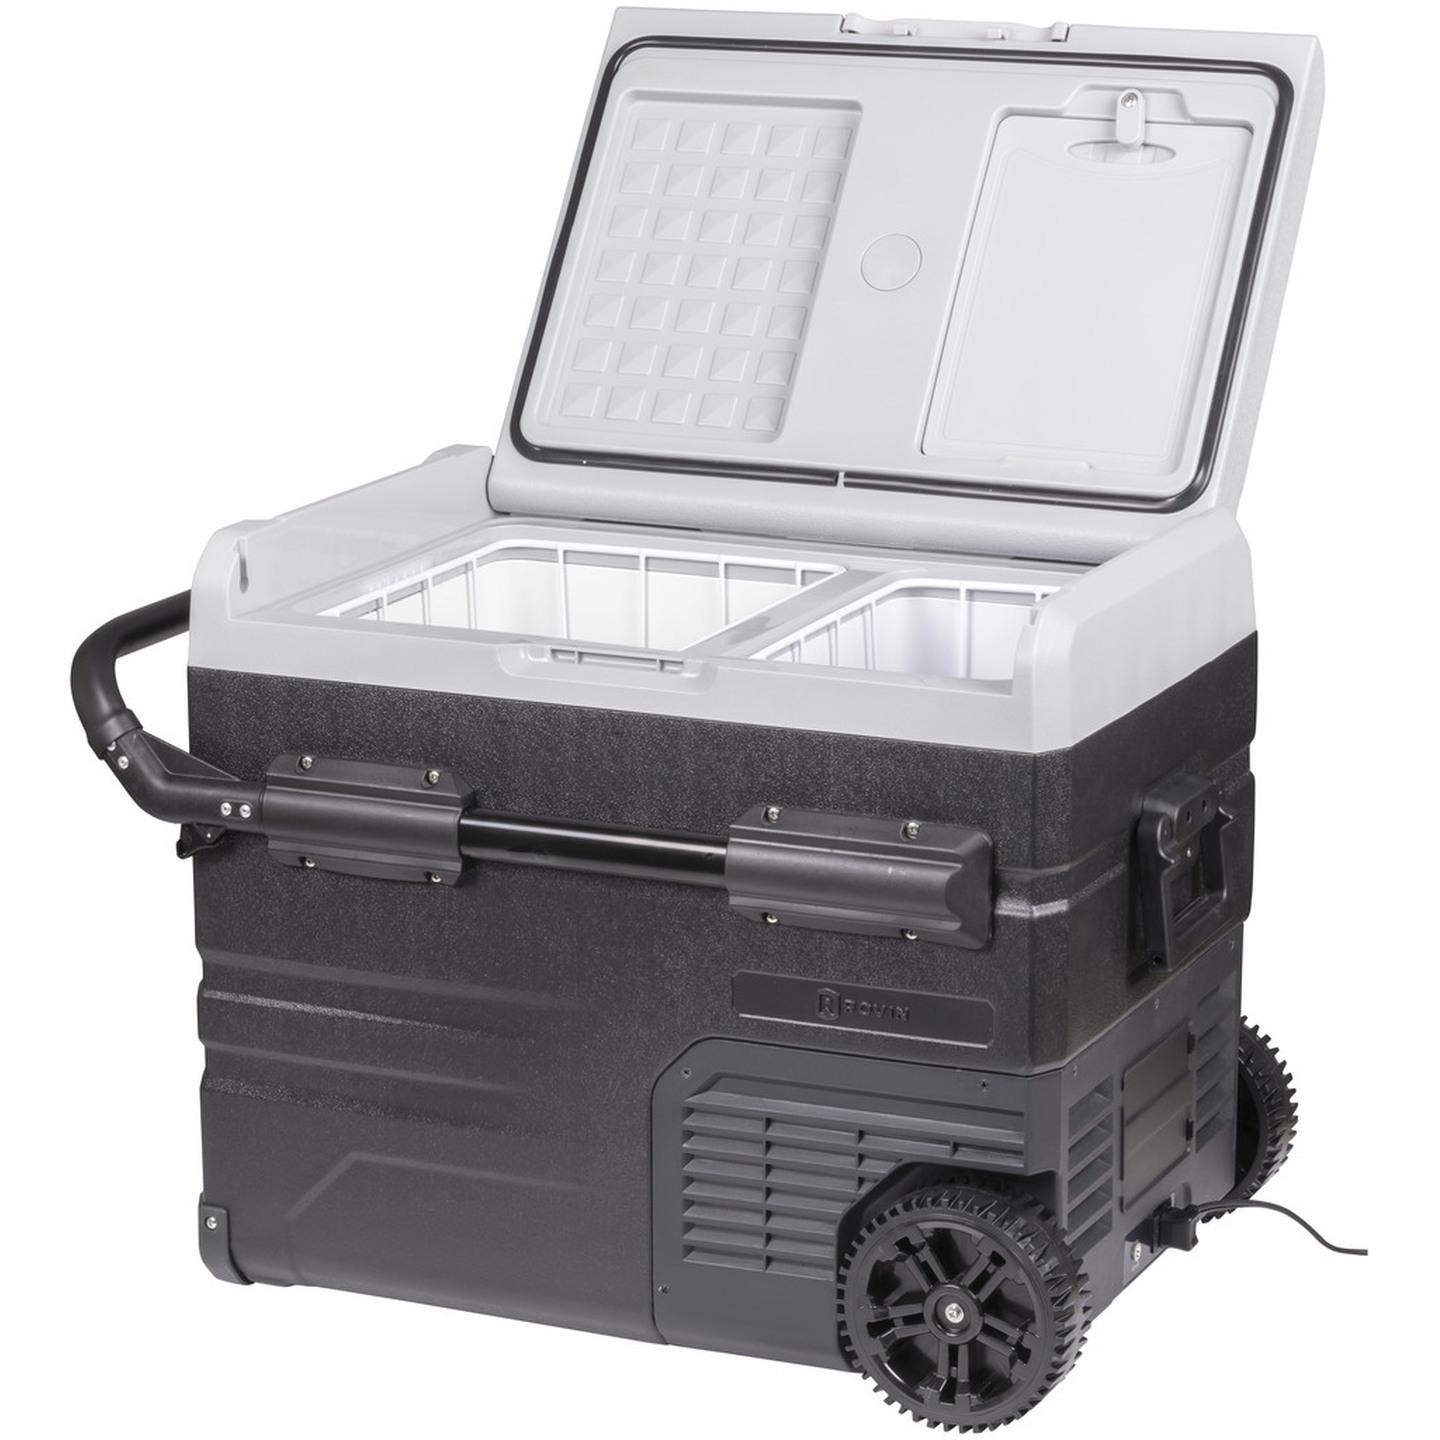 45L Rovin Portable Dual Zone Fridge Freezer with Solar Charger Board plus Handles  Wheels and Support Removable Battery